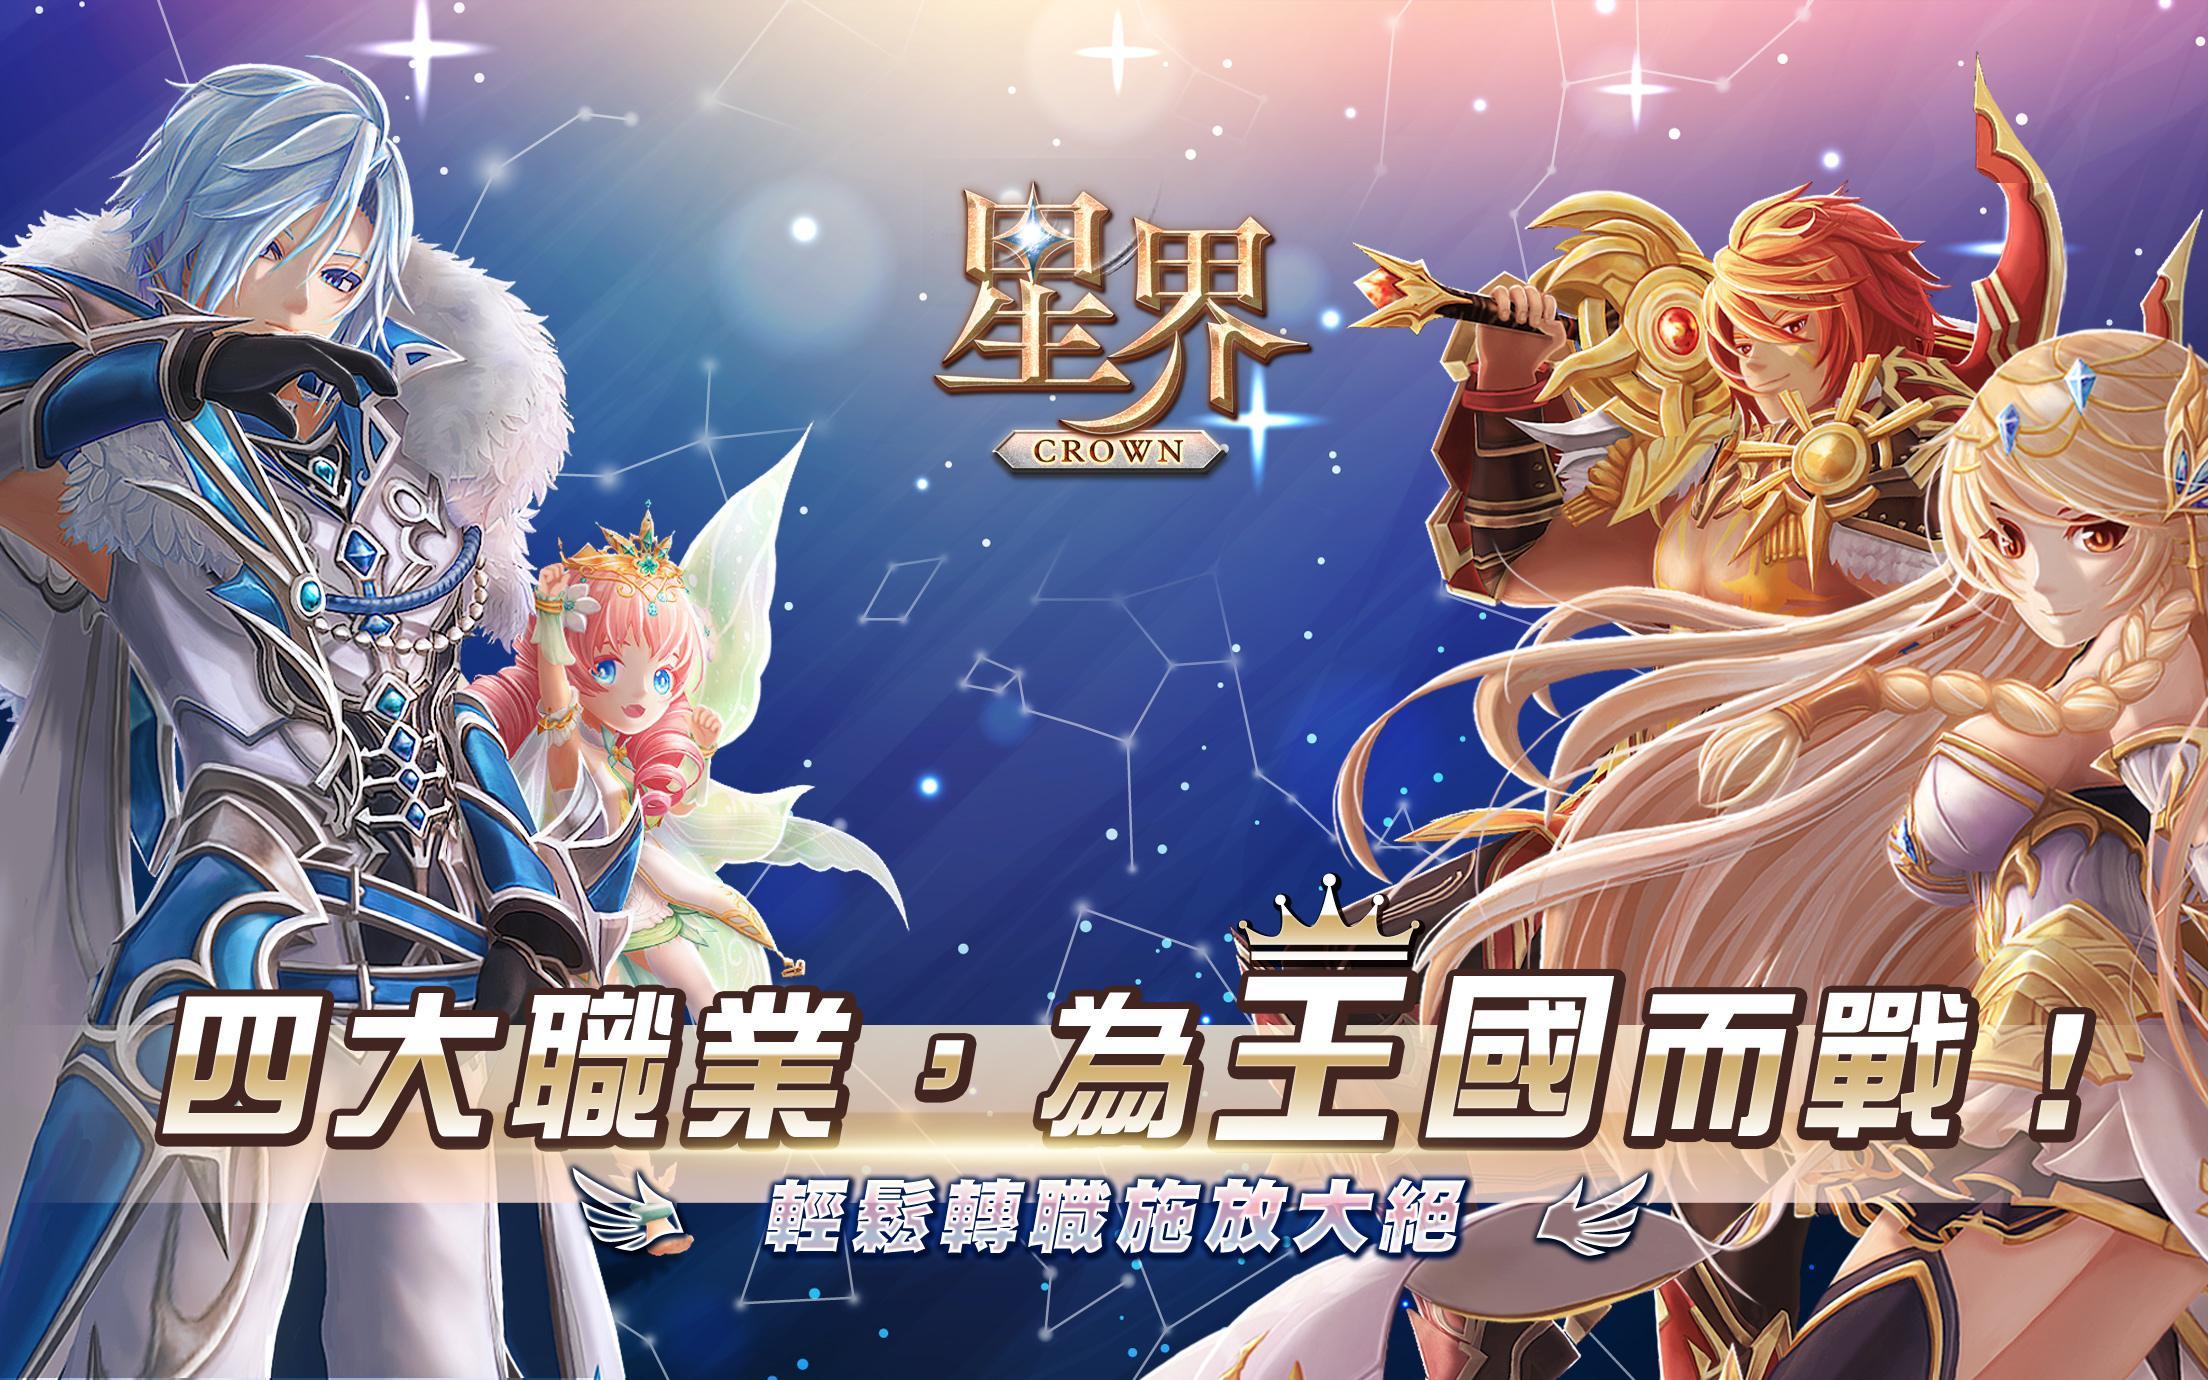 Banner of Astral: The Crown (version Hong Kong et Macao) 11.0.1